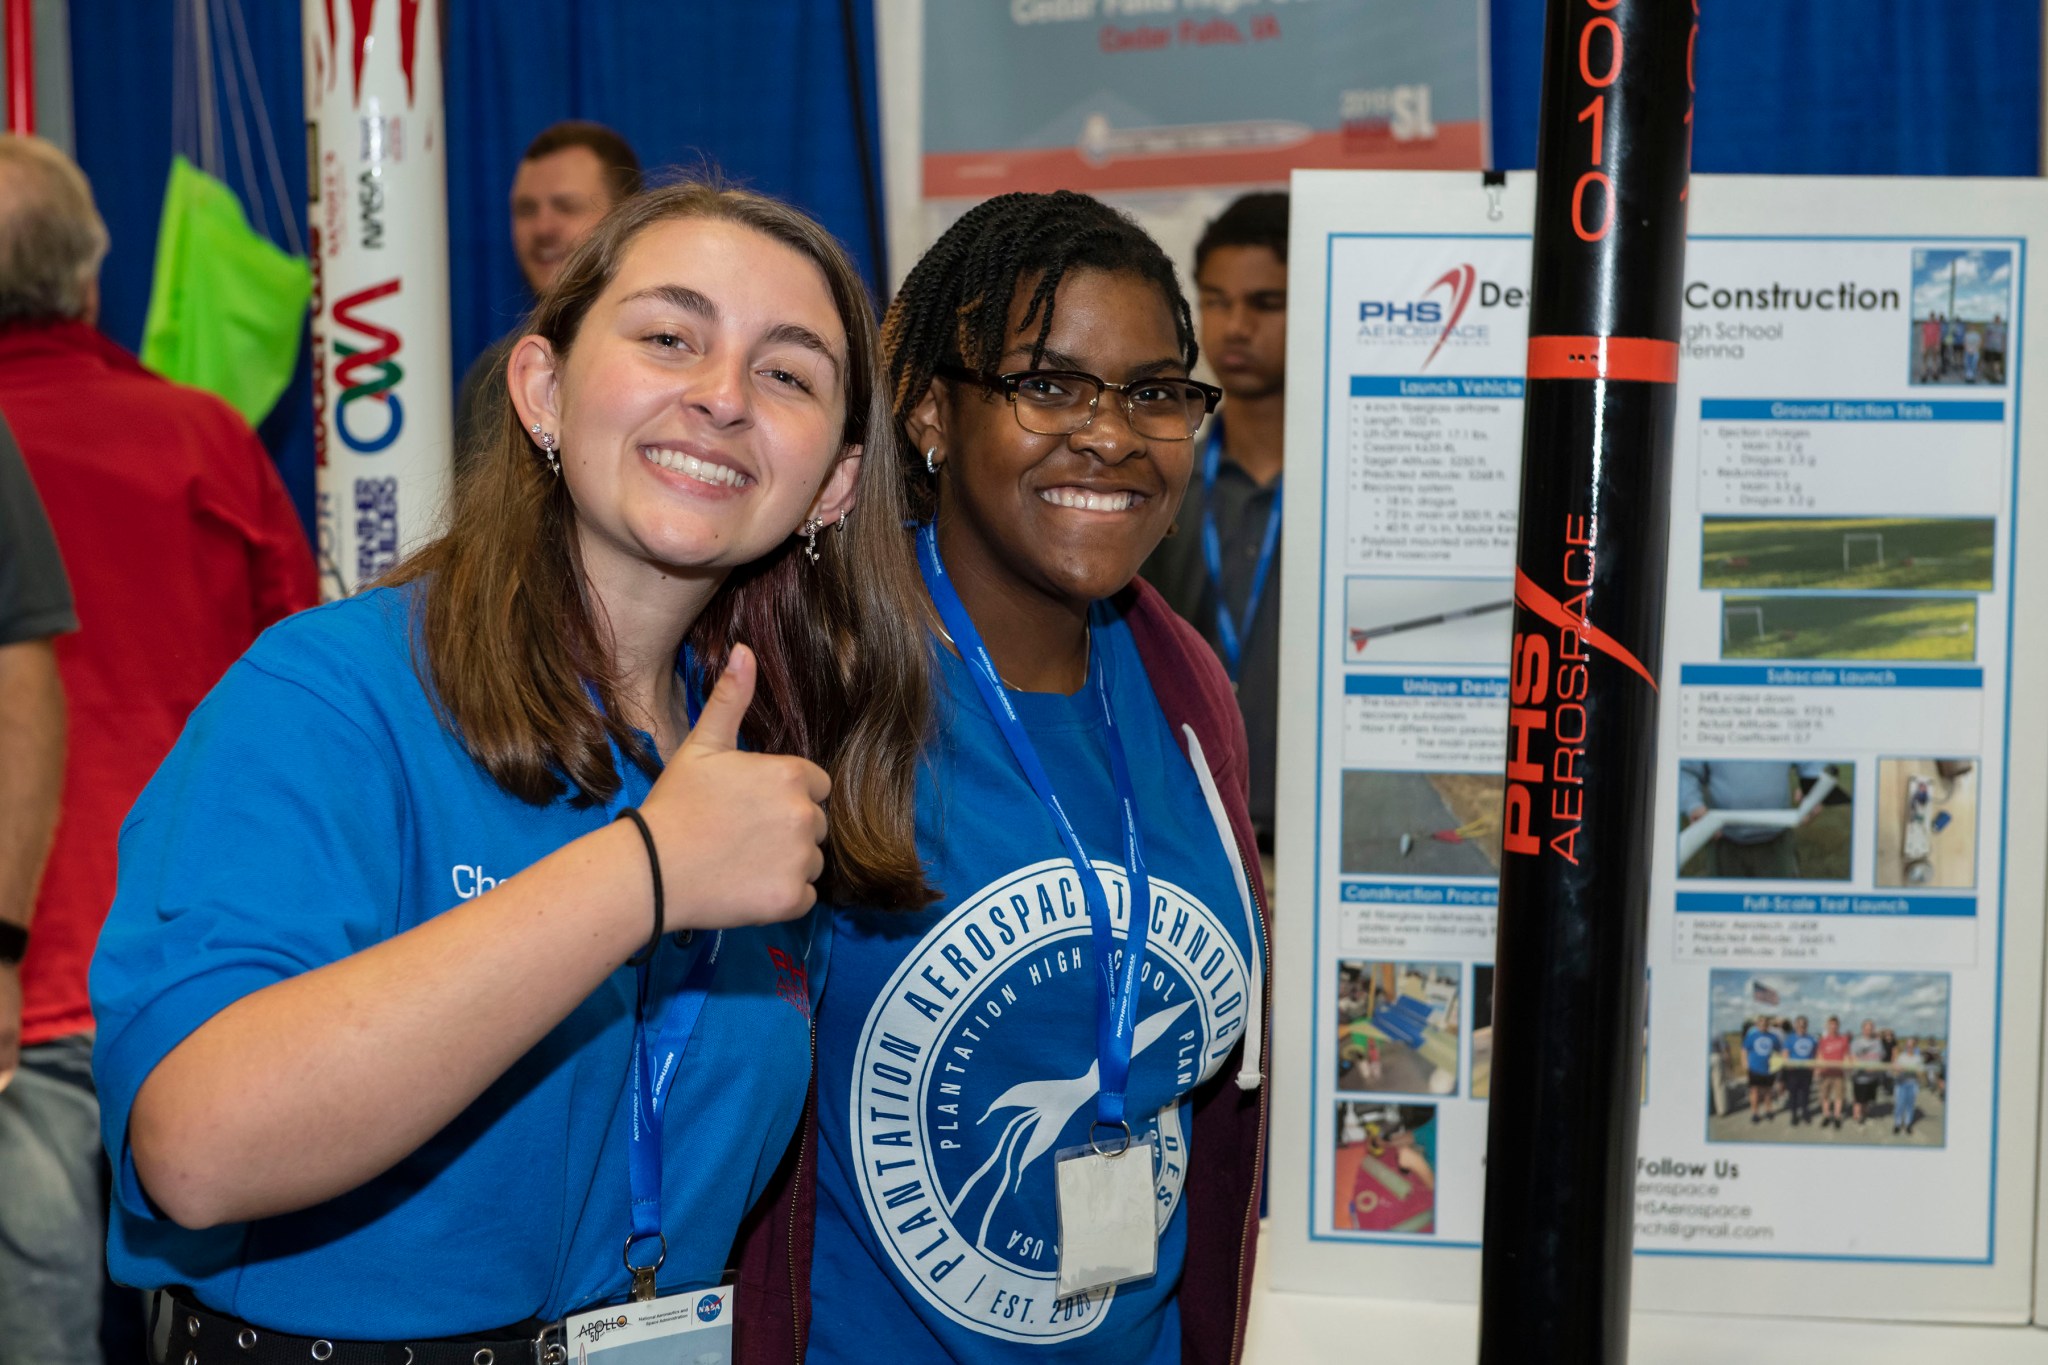 Two students standing next to exhibit giving a thumbs up